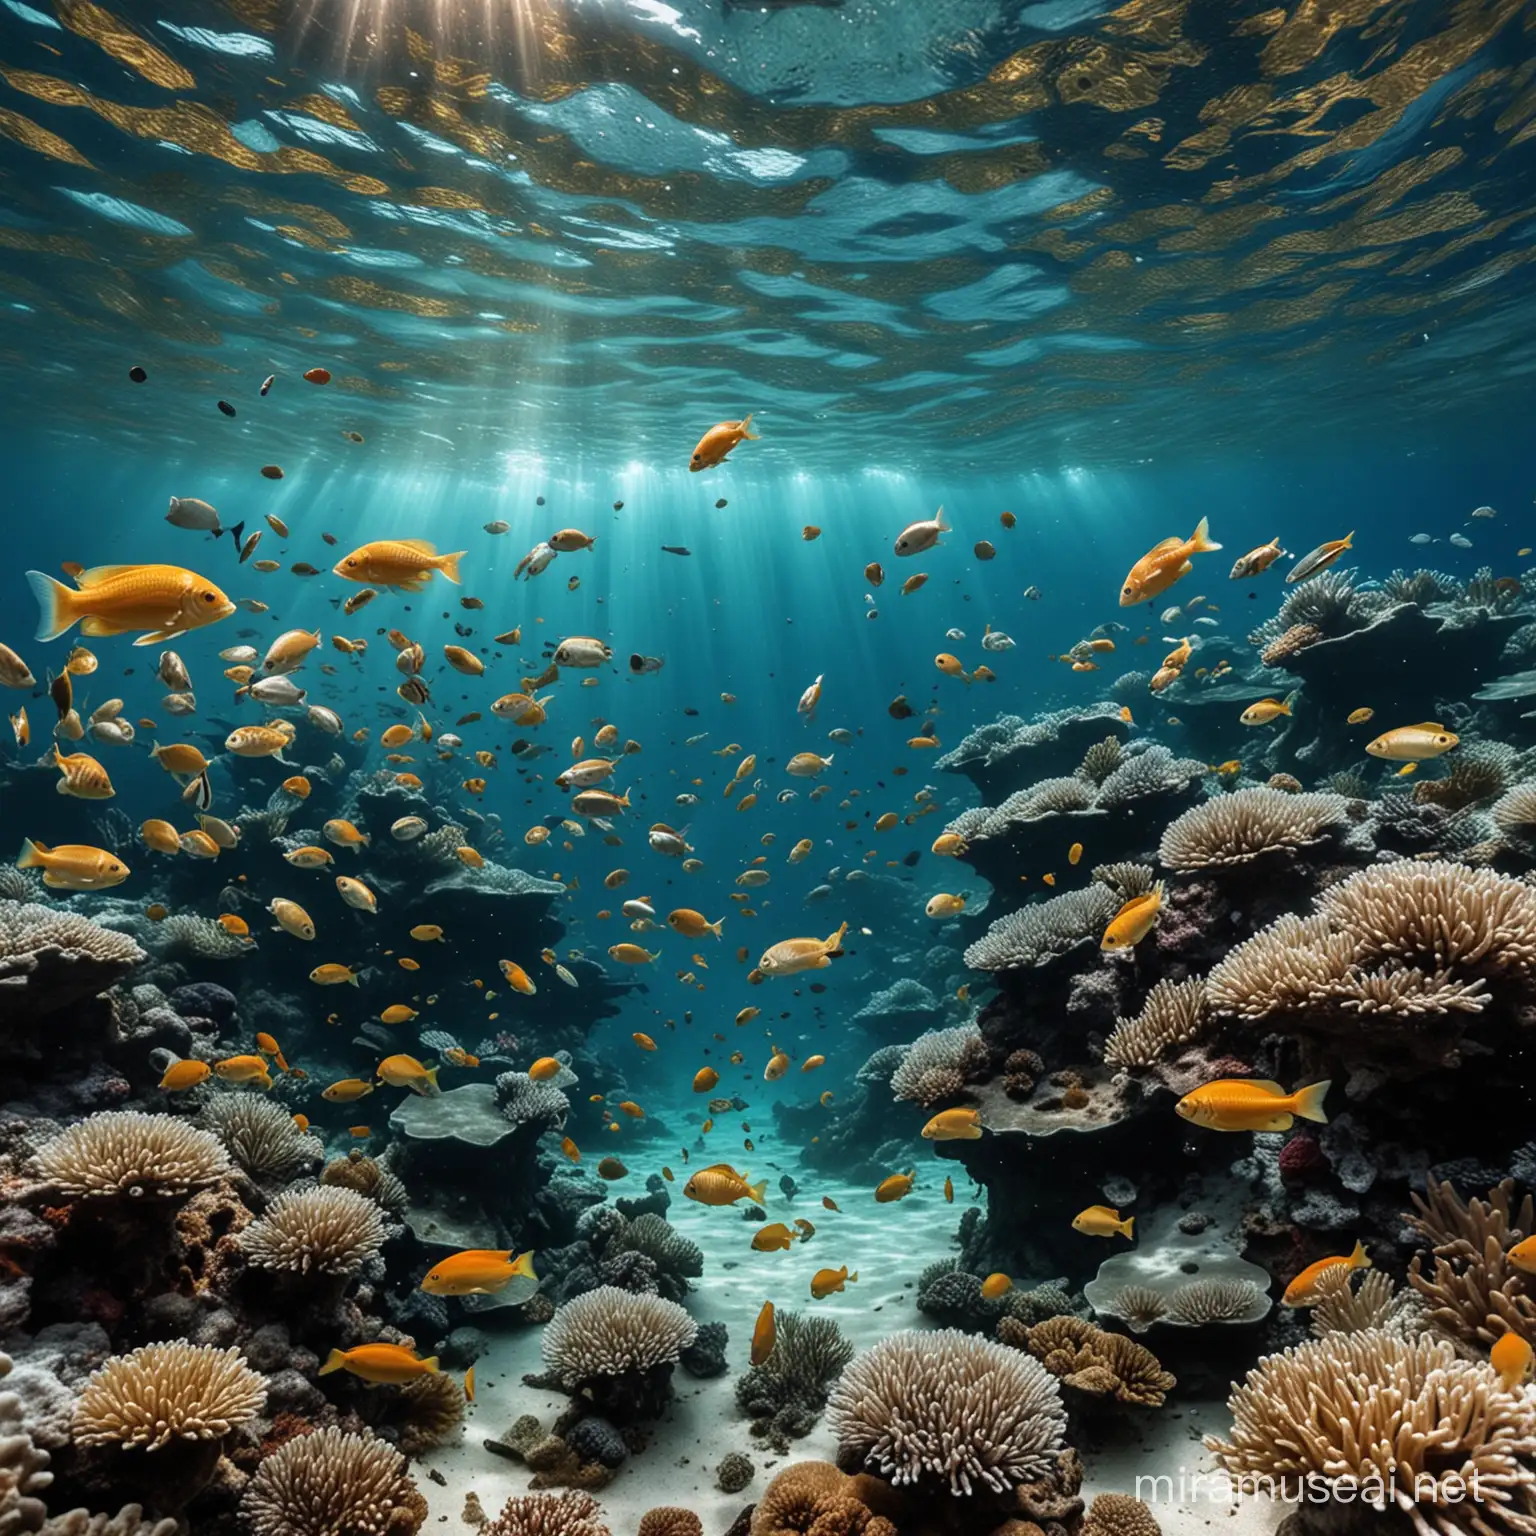 Underwater Scene with Colorful Fish